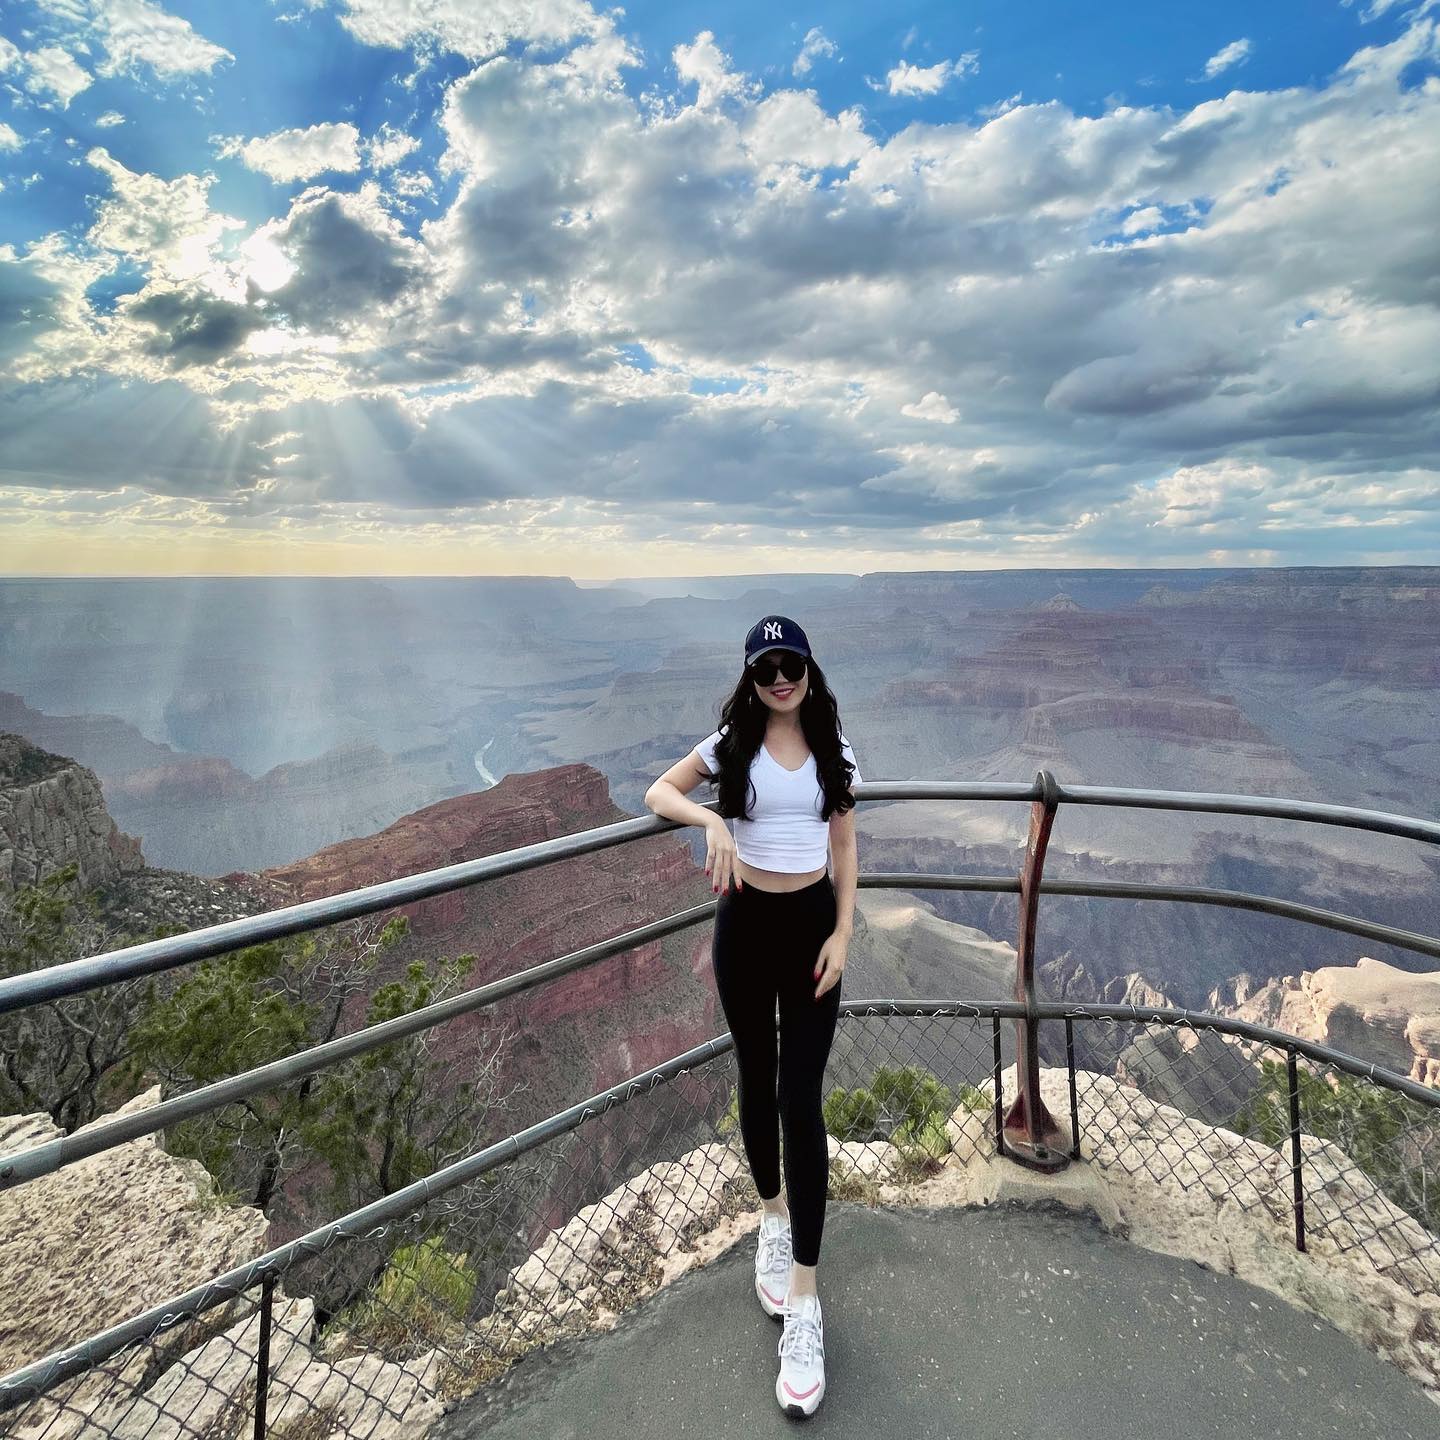  Finally made it to the Grand Canyon! ⛰️